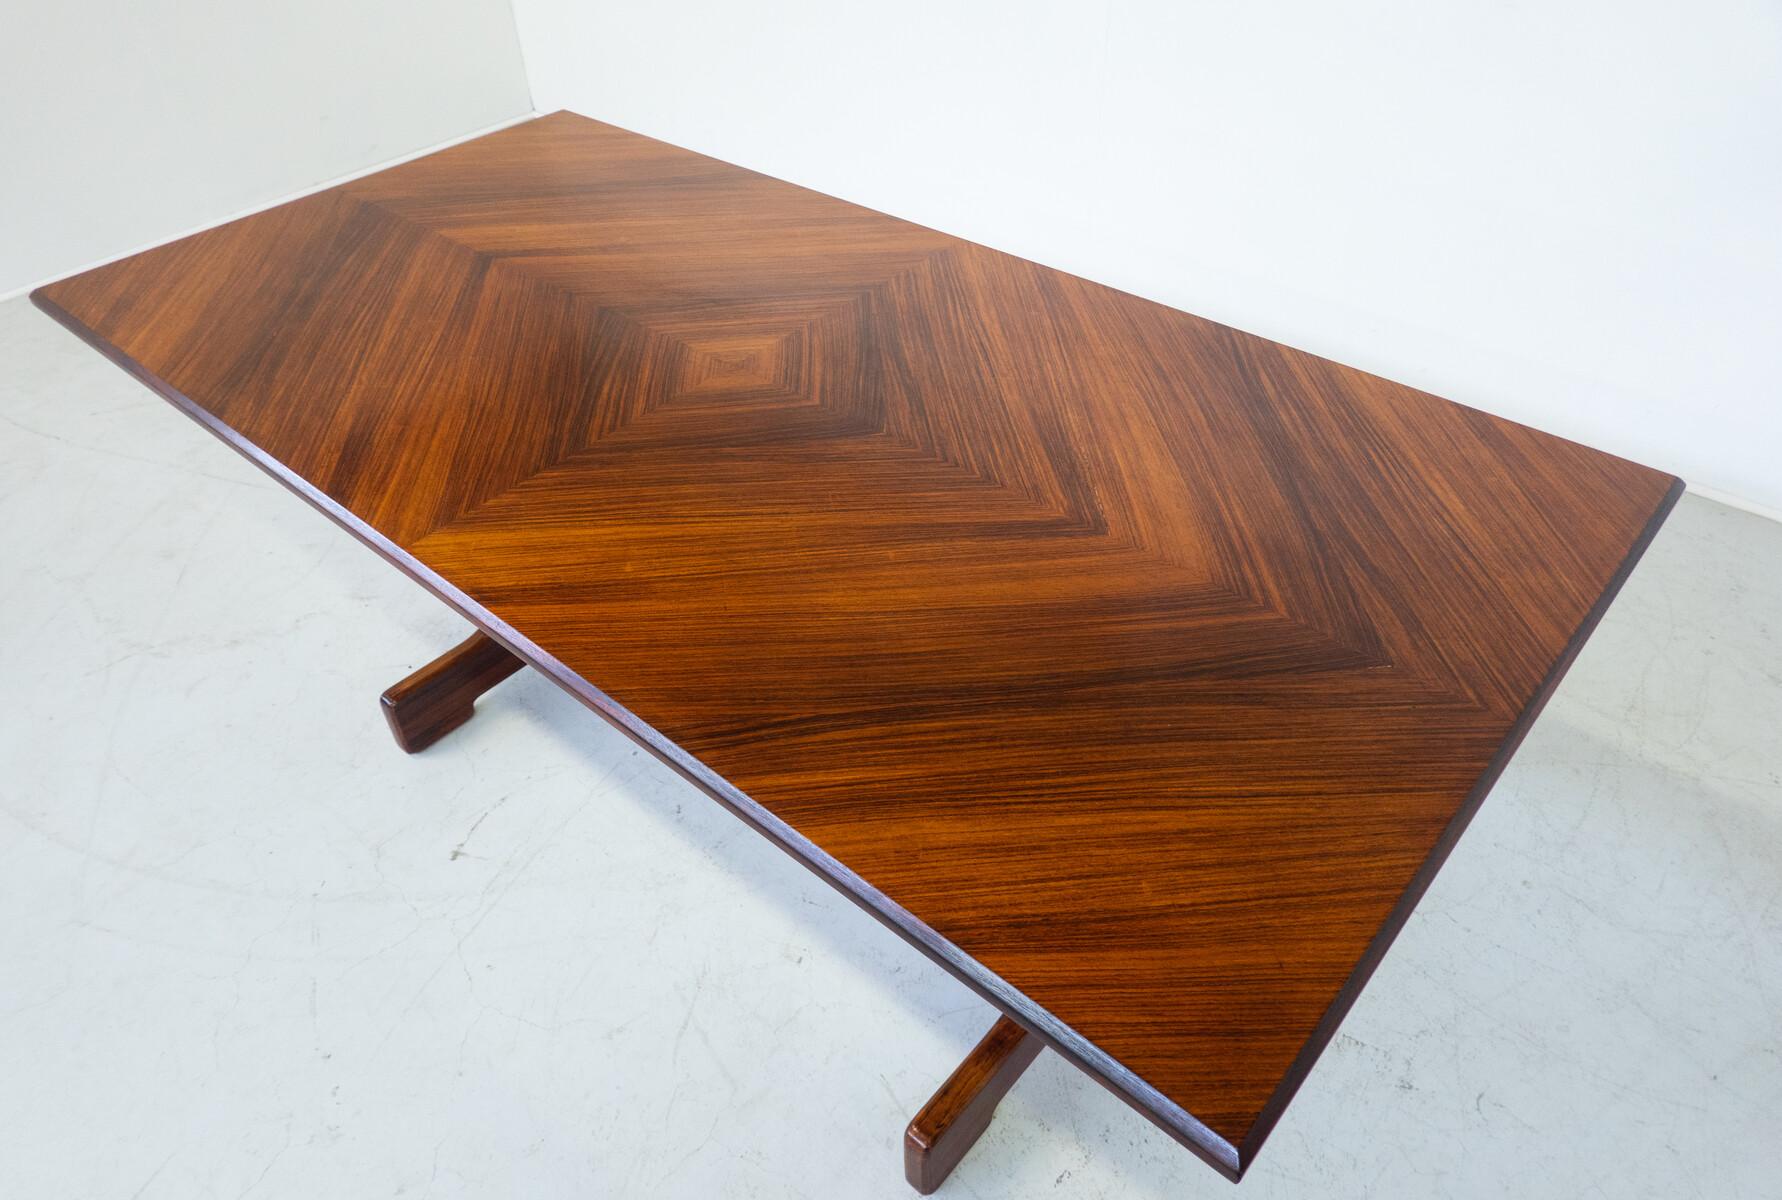 Italian Mid-Century Modern Wooden Dining Table, Italy, 1970s For Sale